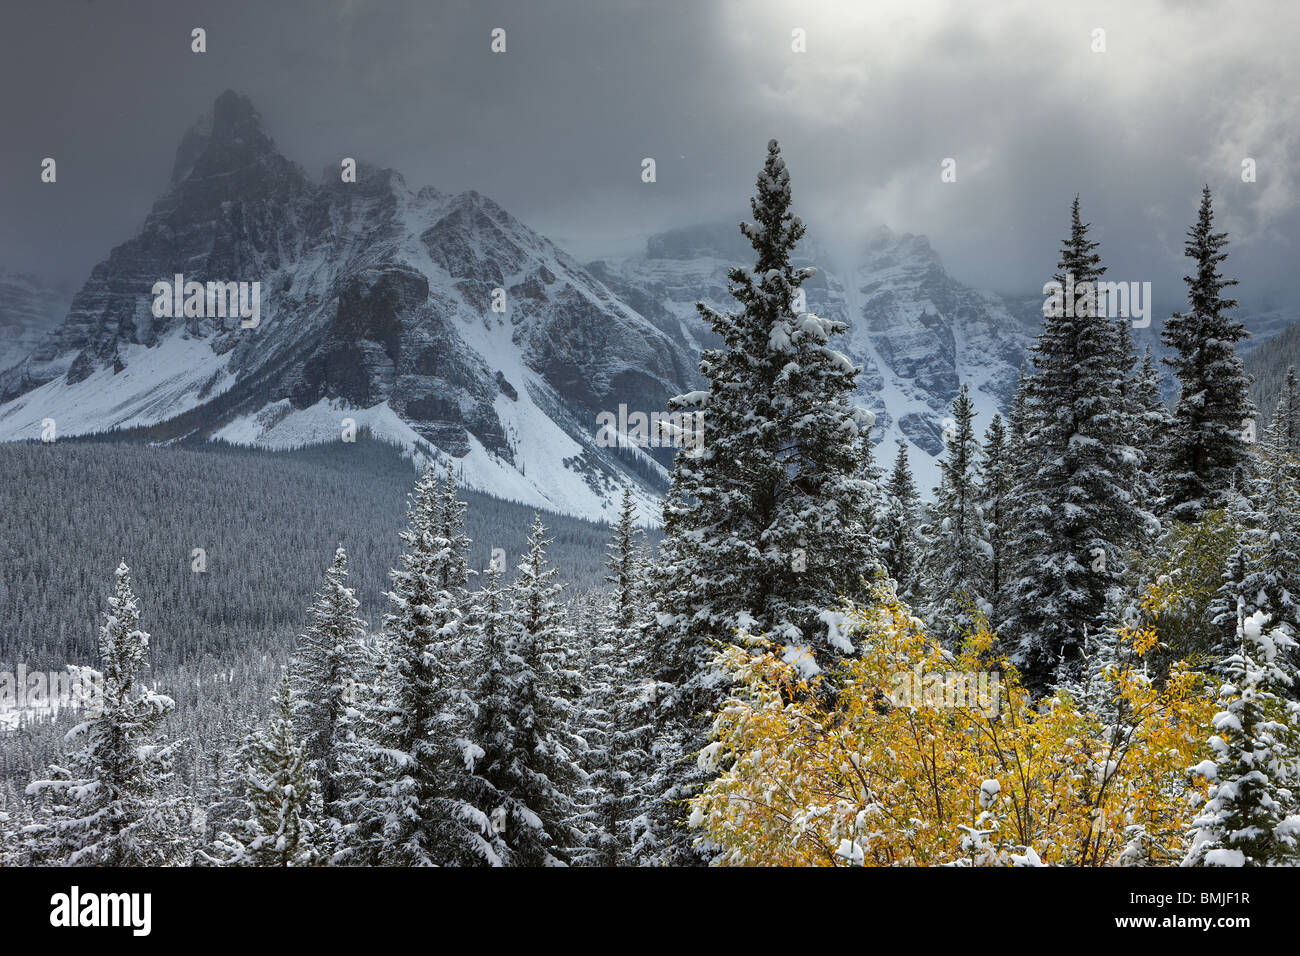 a fresh snowfall in the Valley of the Ten Peaks, Banff National Park, Alberta, Canada Stock Photo